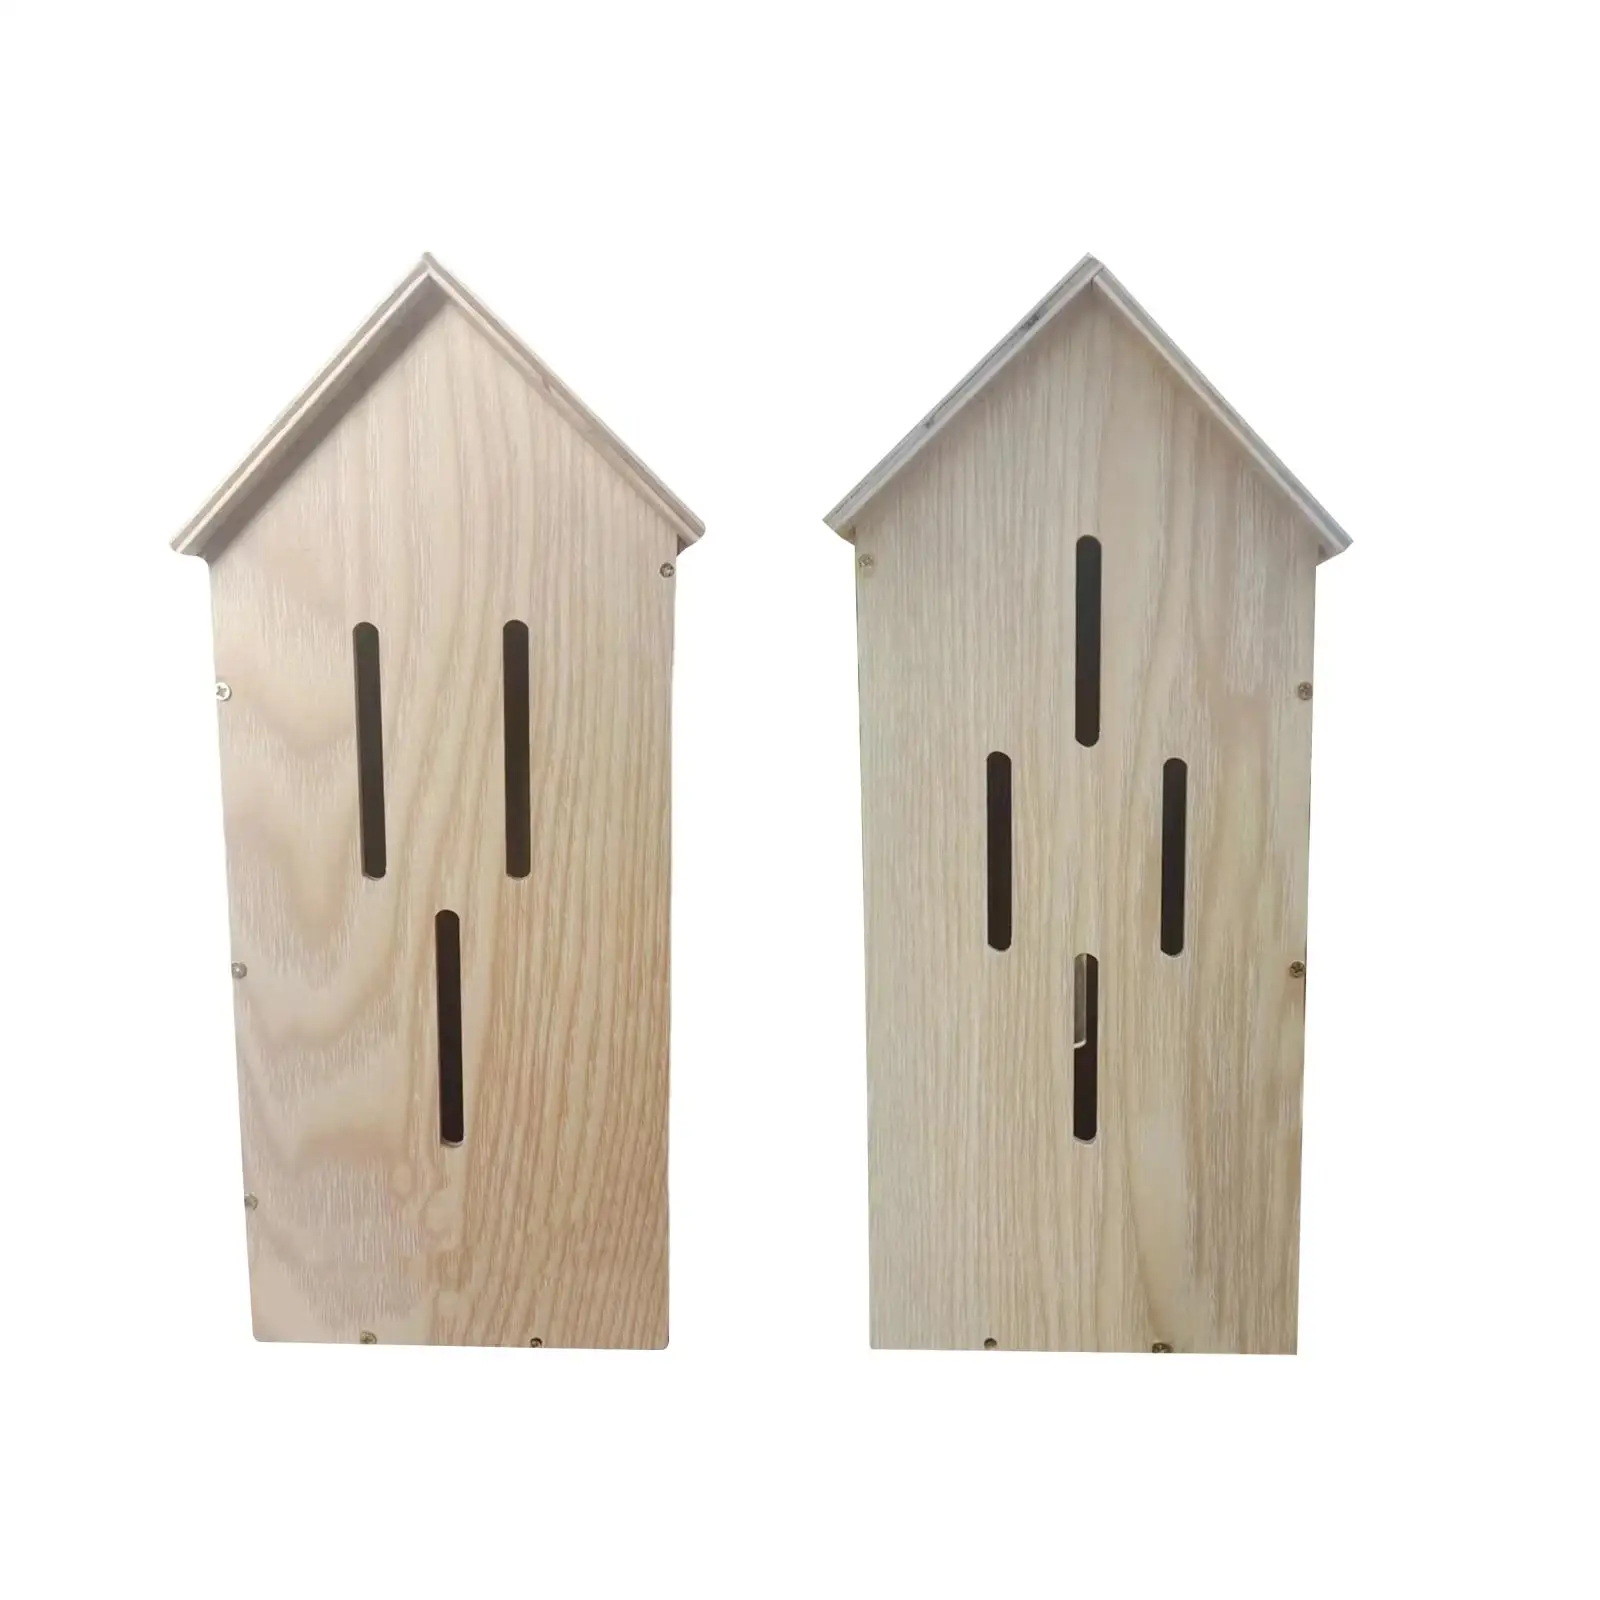 Butterfly Habitat Supplies Tree Trunk Protector Guard Bird house Kit House for Garden Room Outdoor Hotel